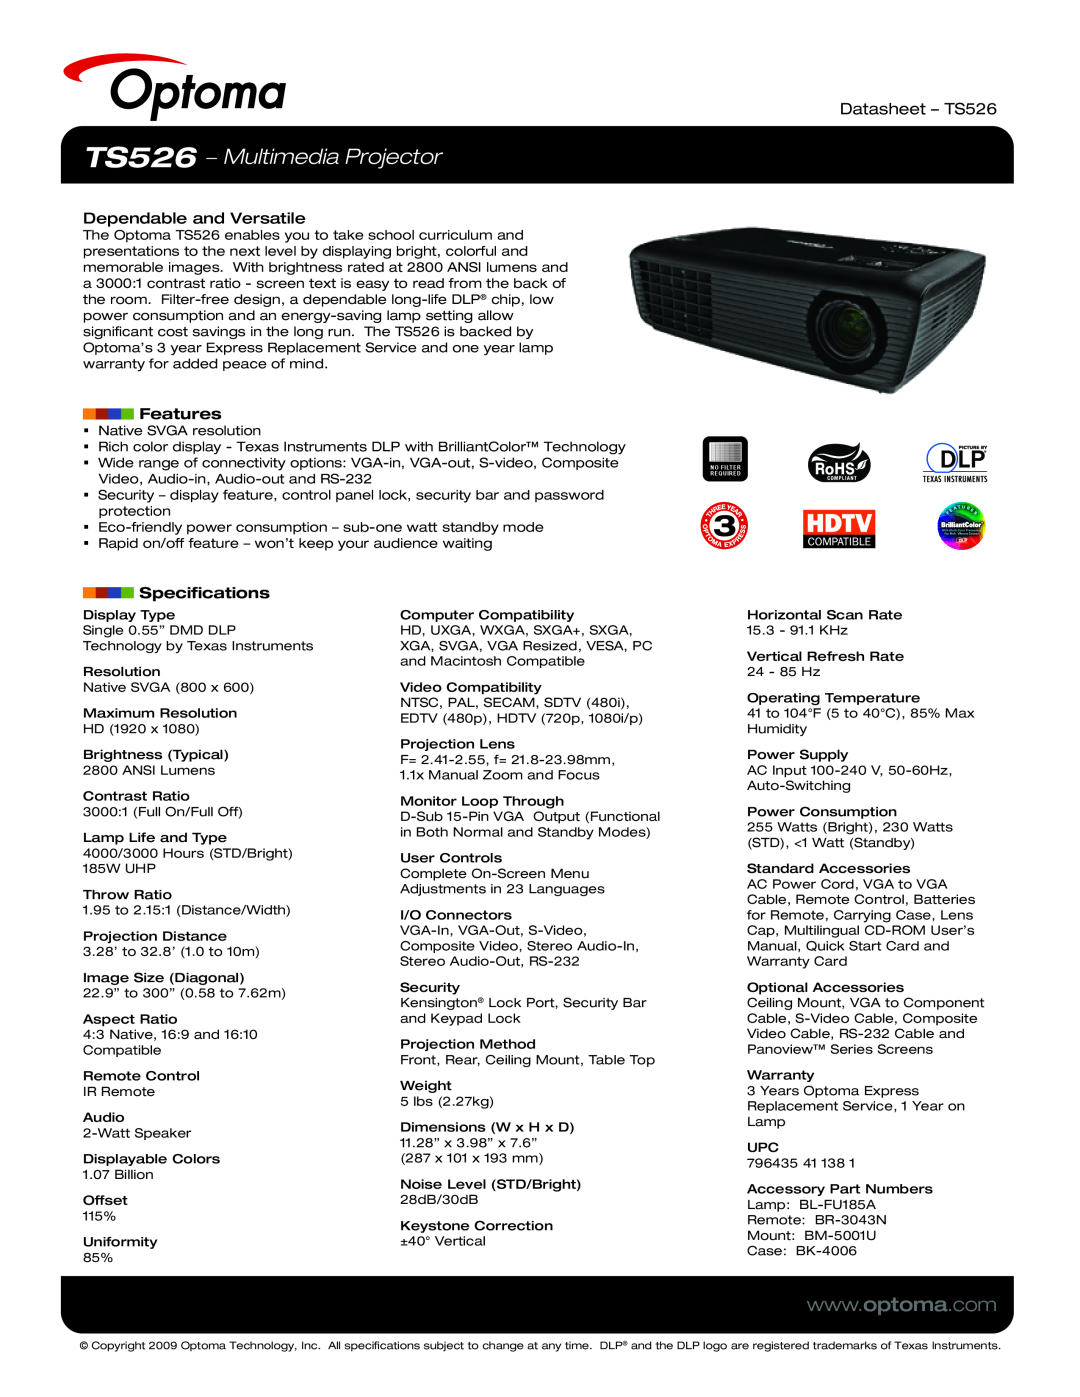 Optoma Technology specifications TS526 − Multimedia Projector, Dependable and Versatile, Features, Datasheet - TS526 